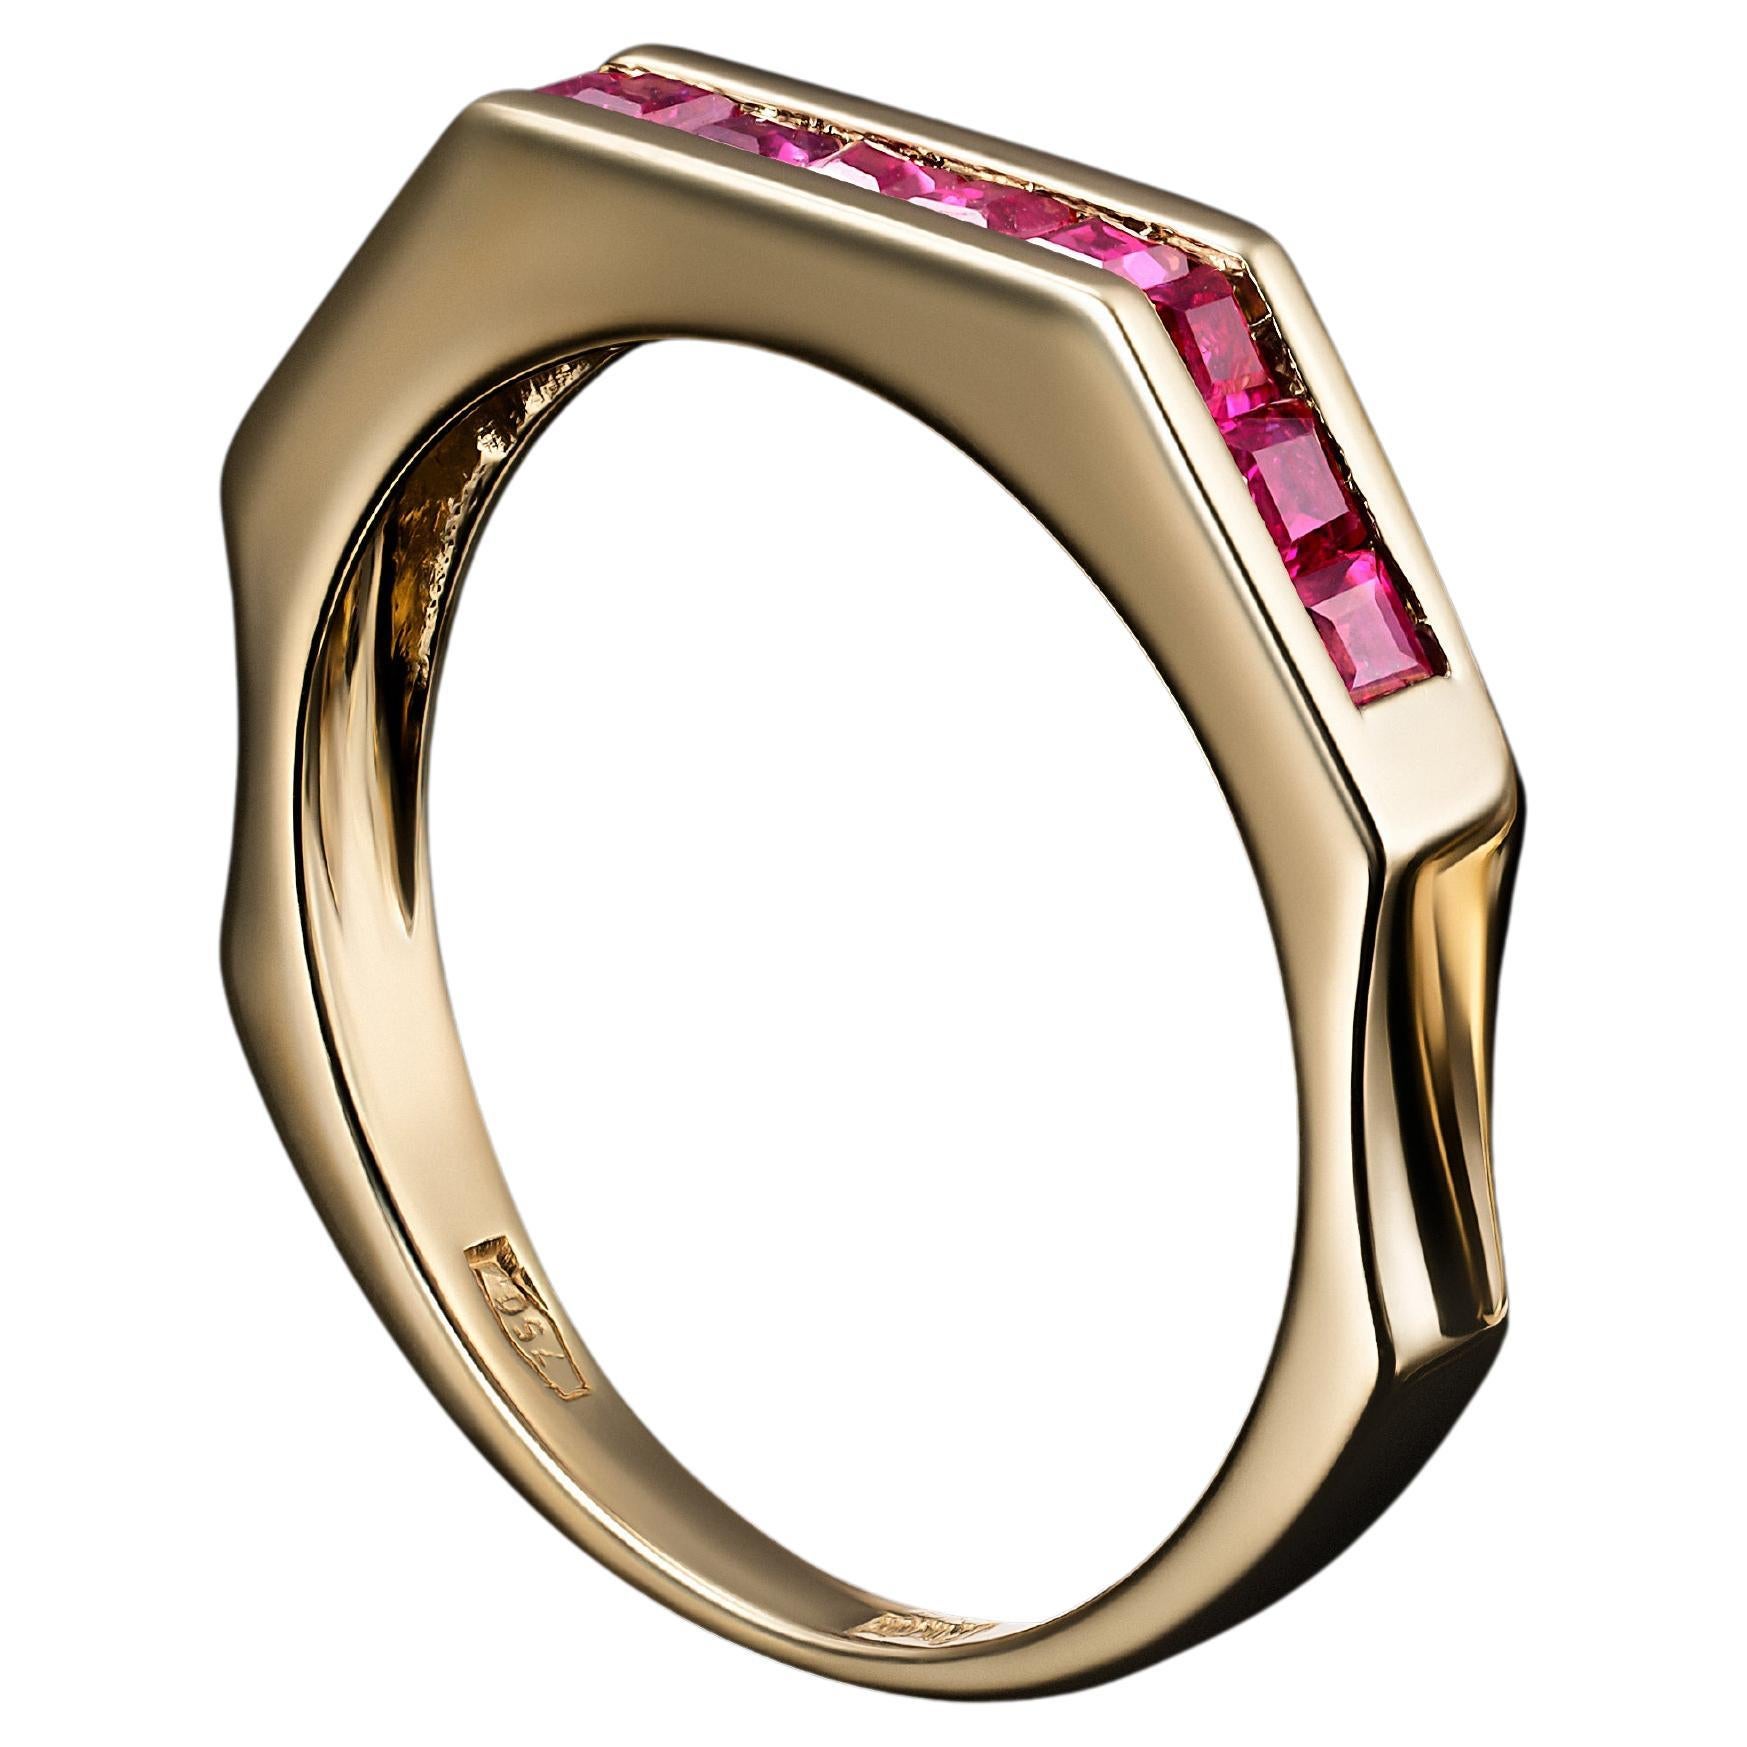 A gorgeous Art Deco-styled ring set with Burmese rubies, manufactured in the early 1990's by Italian master artisans. 

Meticulously hand-made, this 18k yellow gold ring exudes timeless sophistication. Geometric balance in the form of delicate